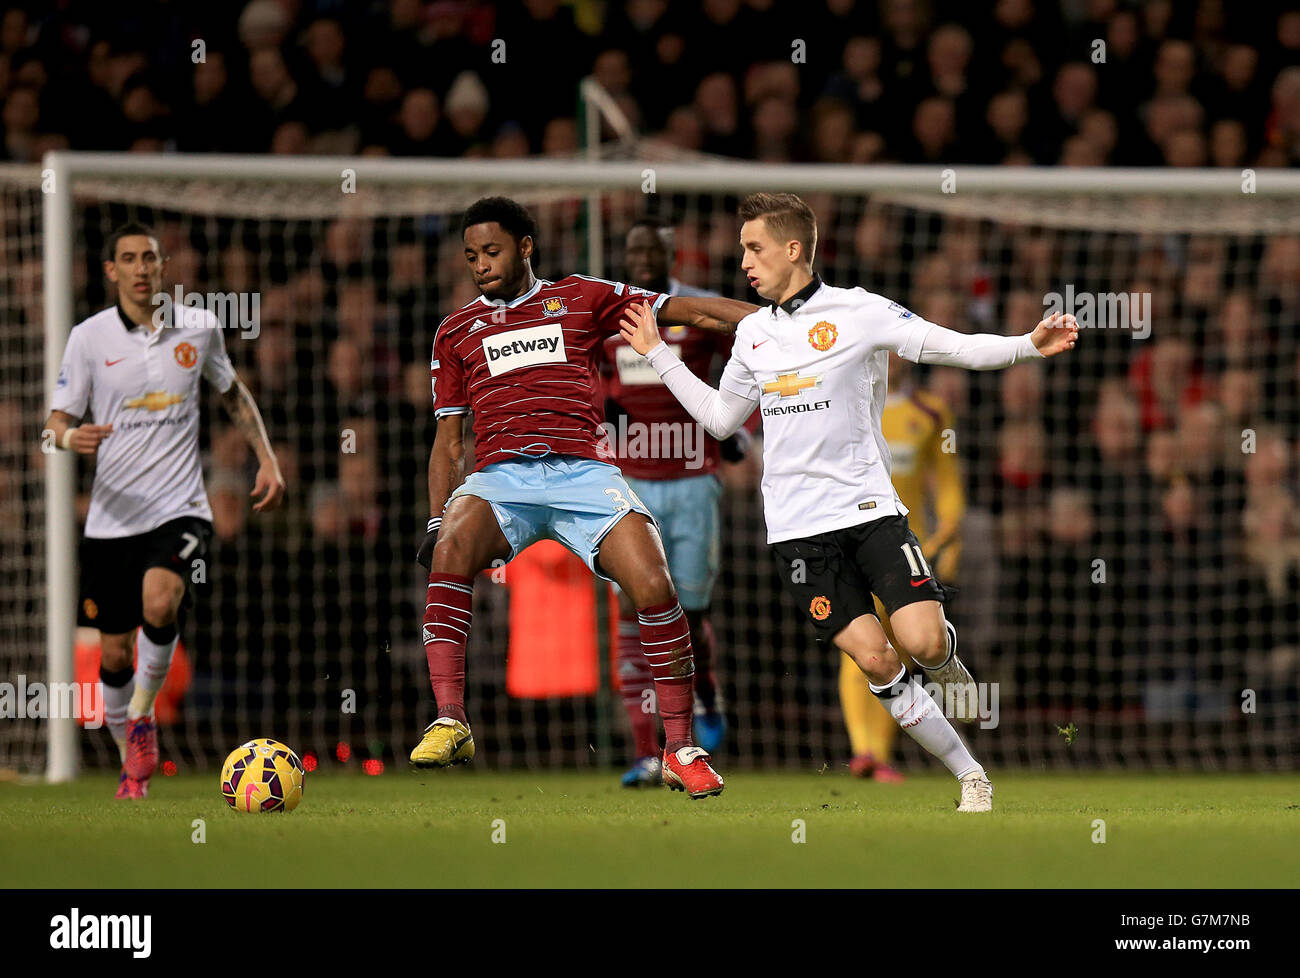 West Ham United's Alex Song battles for the ball with Manchester United's Adnan Januzaj during the Barclays Premier League match at Upton Park, London. Stock Photo